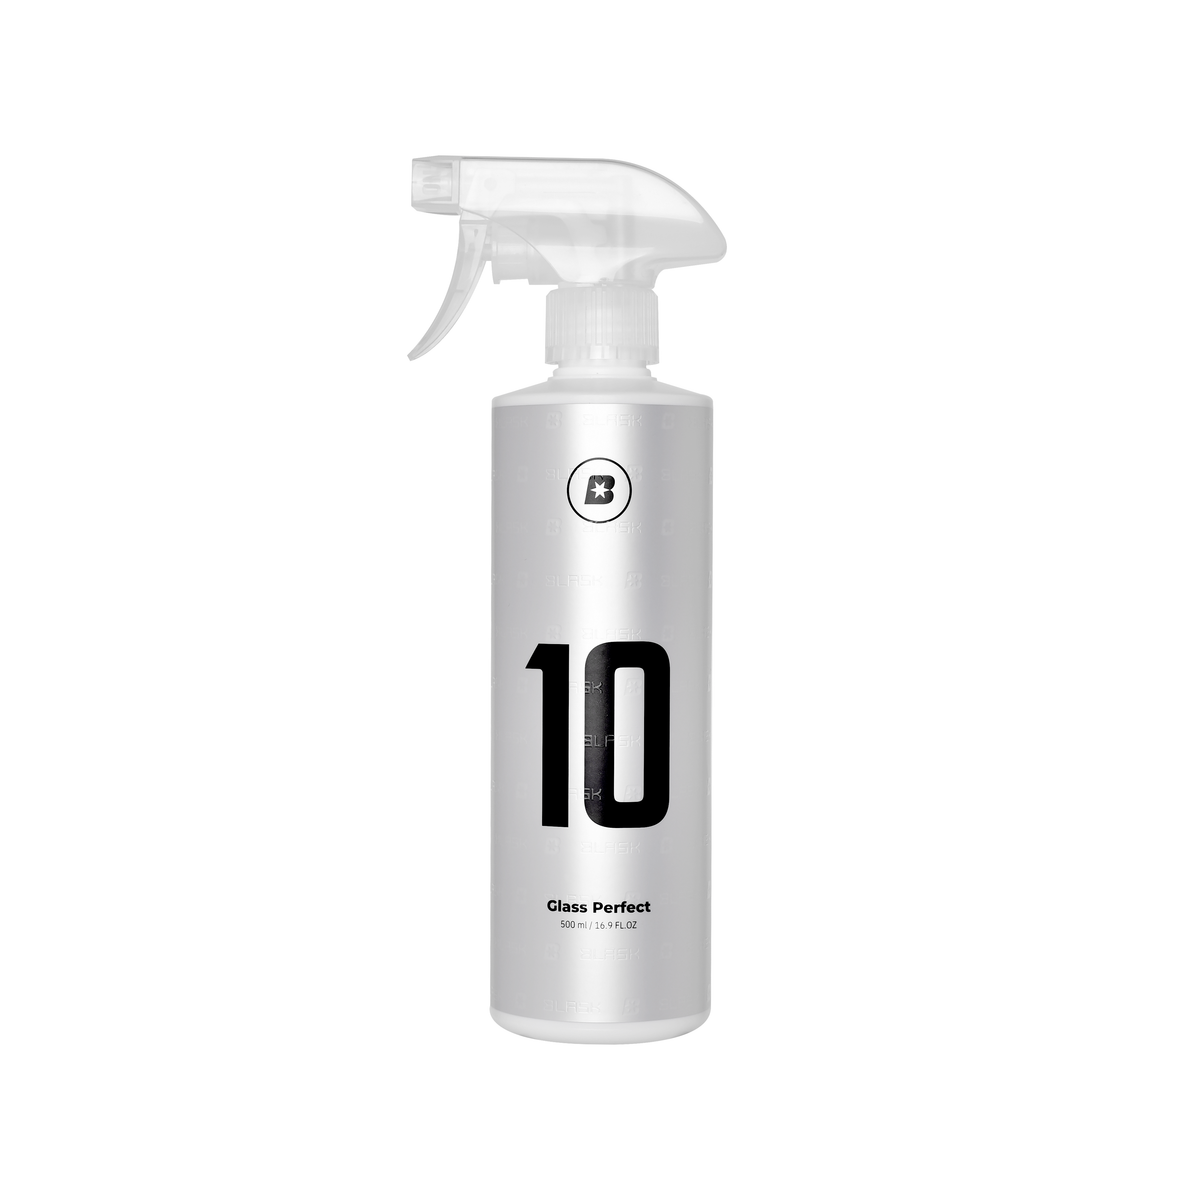 #10 Glass Perfect - Exterior Car Detailing Product